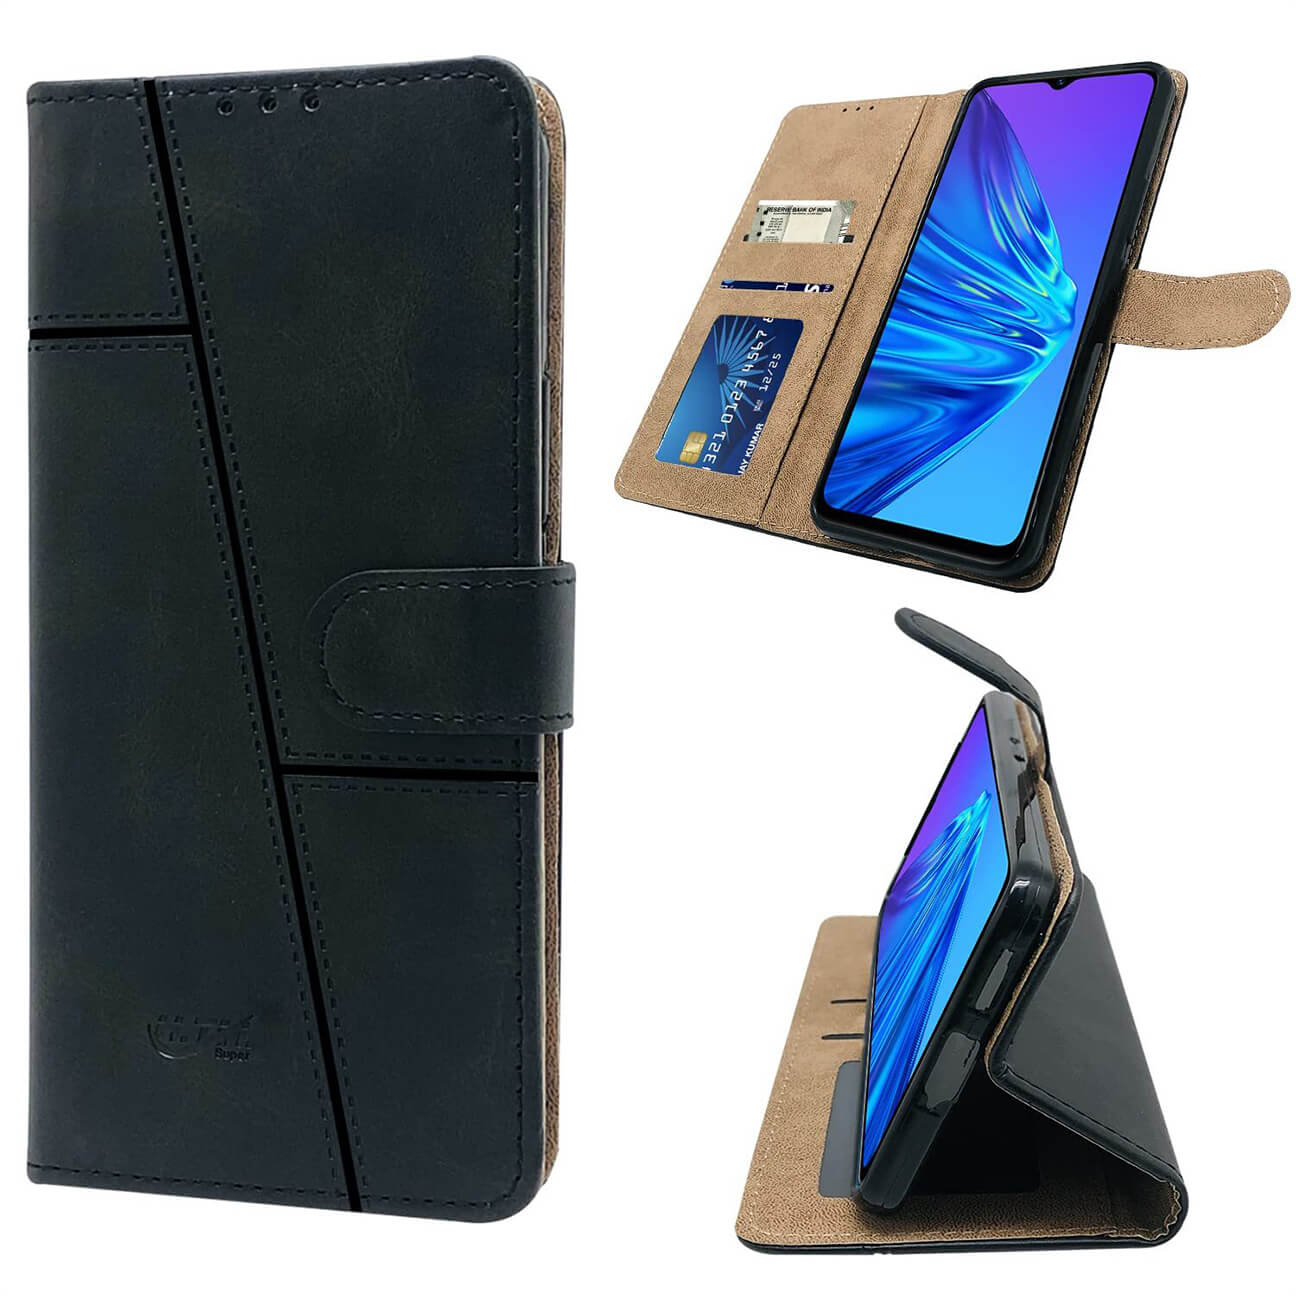 Samsung Galaxy J2 Ace (Old) Flip Cover